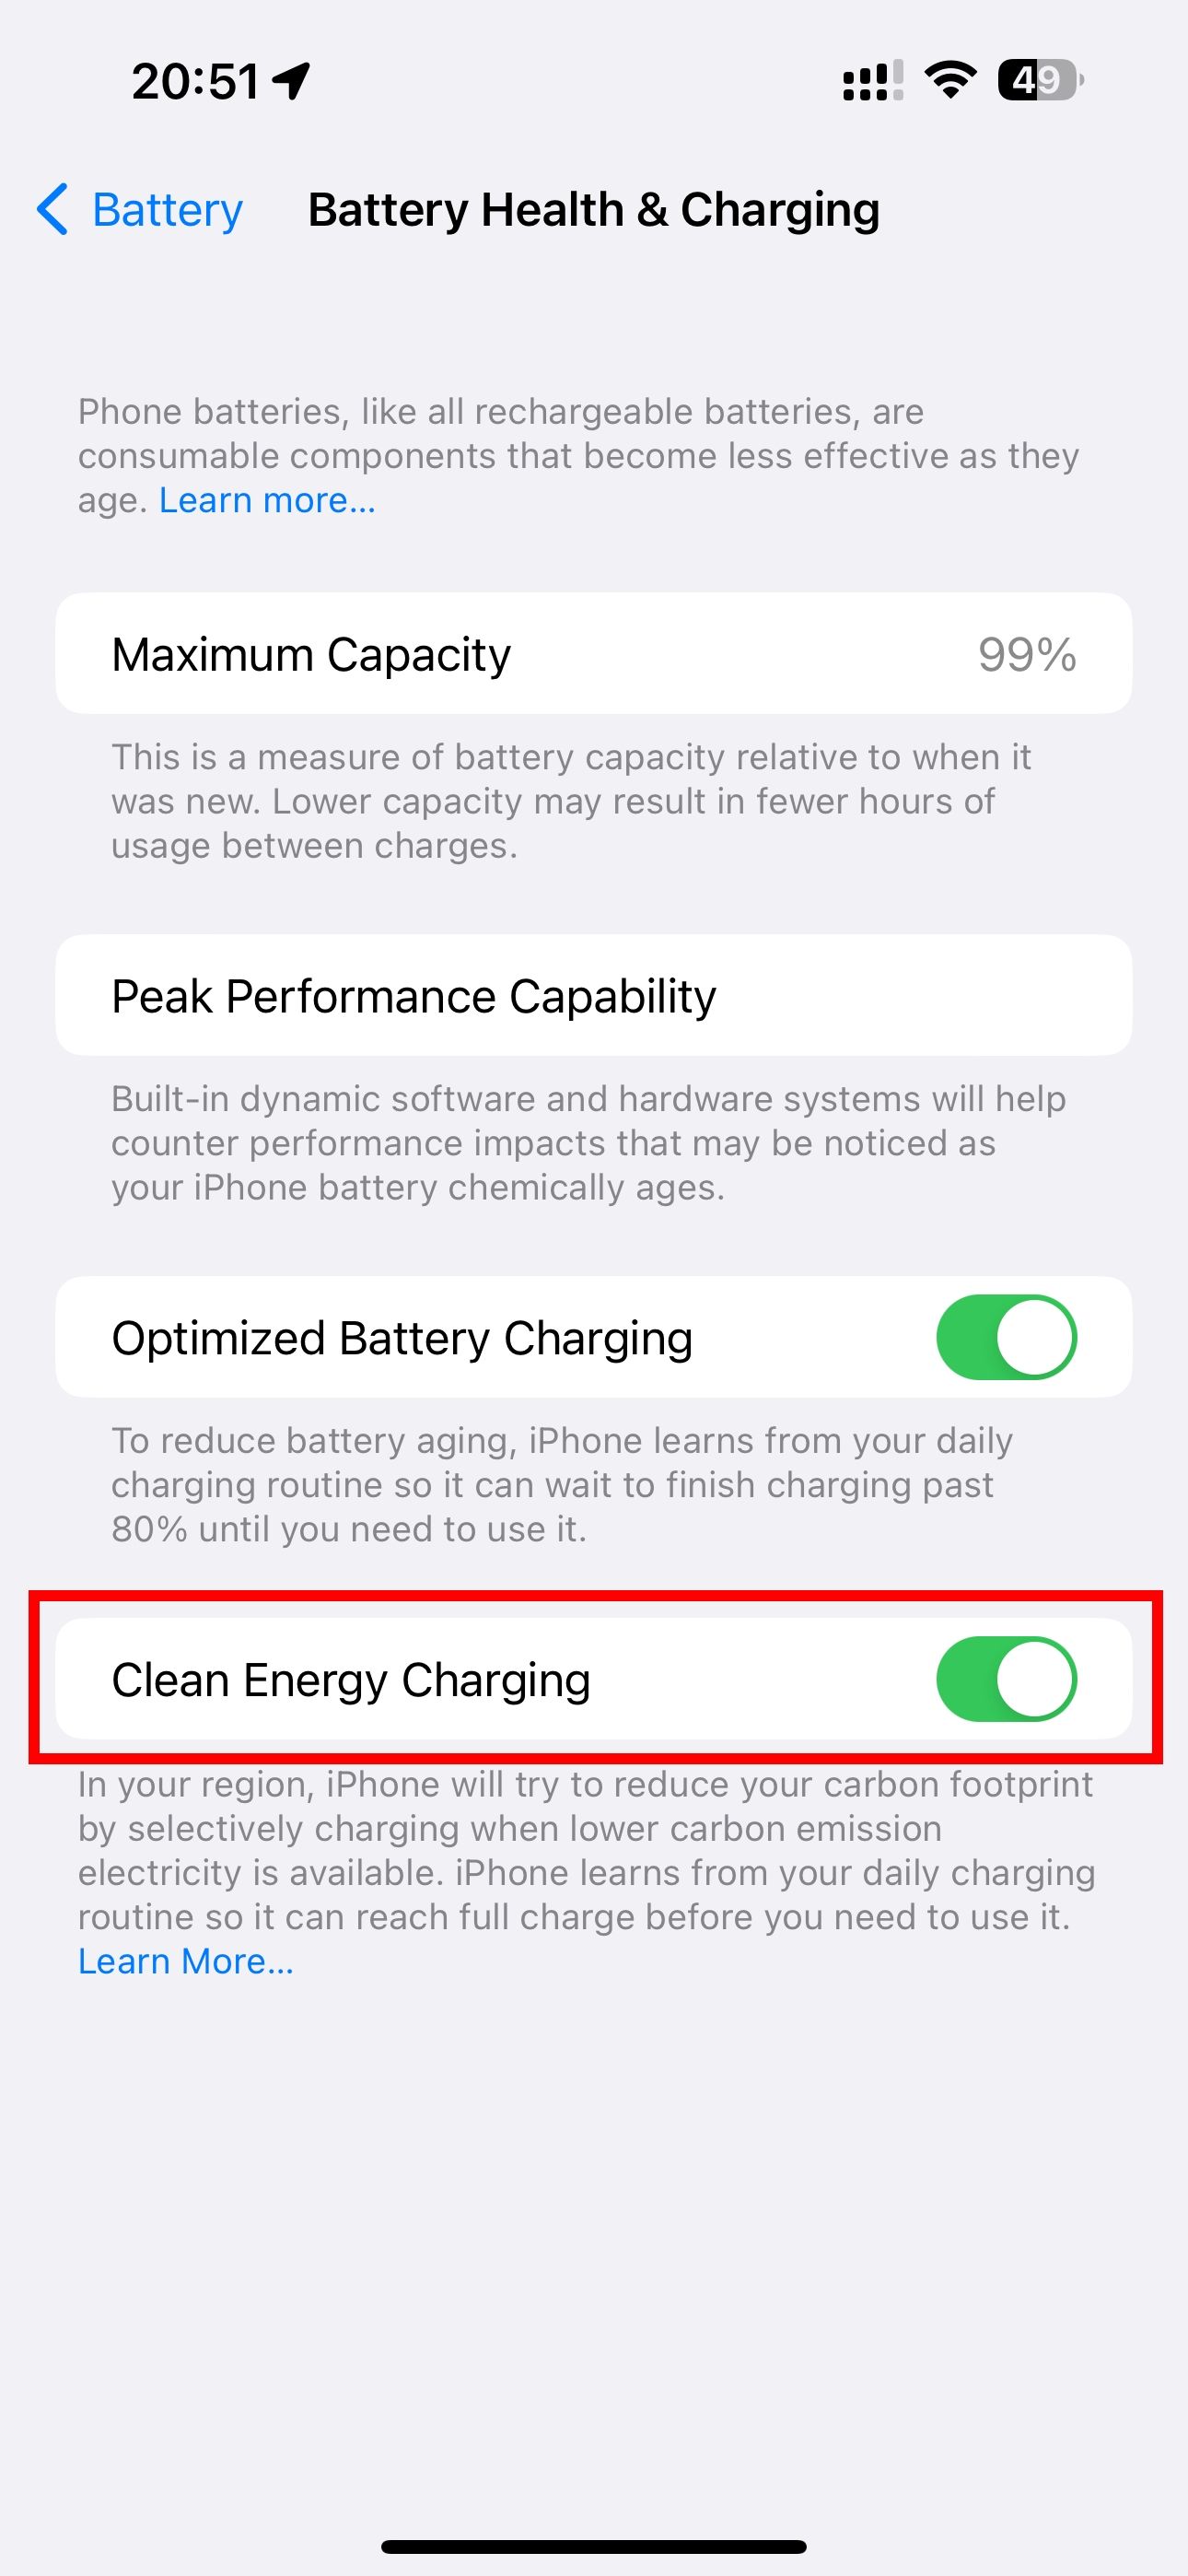 The iPhone Battery settings in iOS 16 with the Clean Energy Charging option highlighted